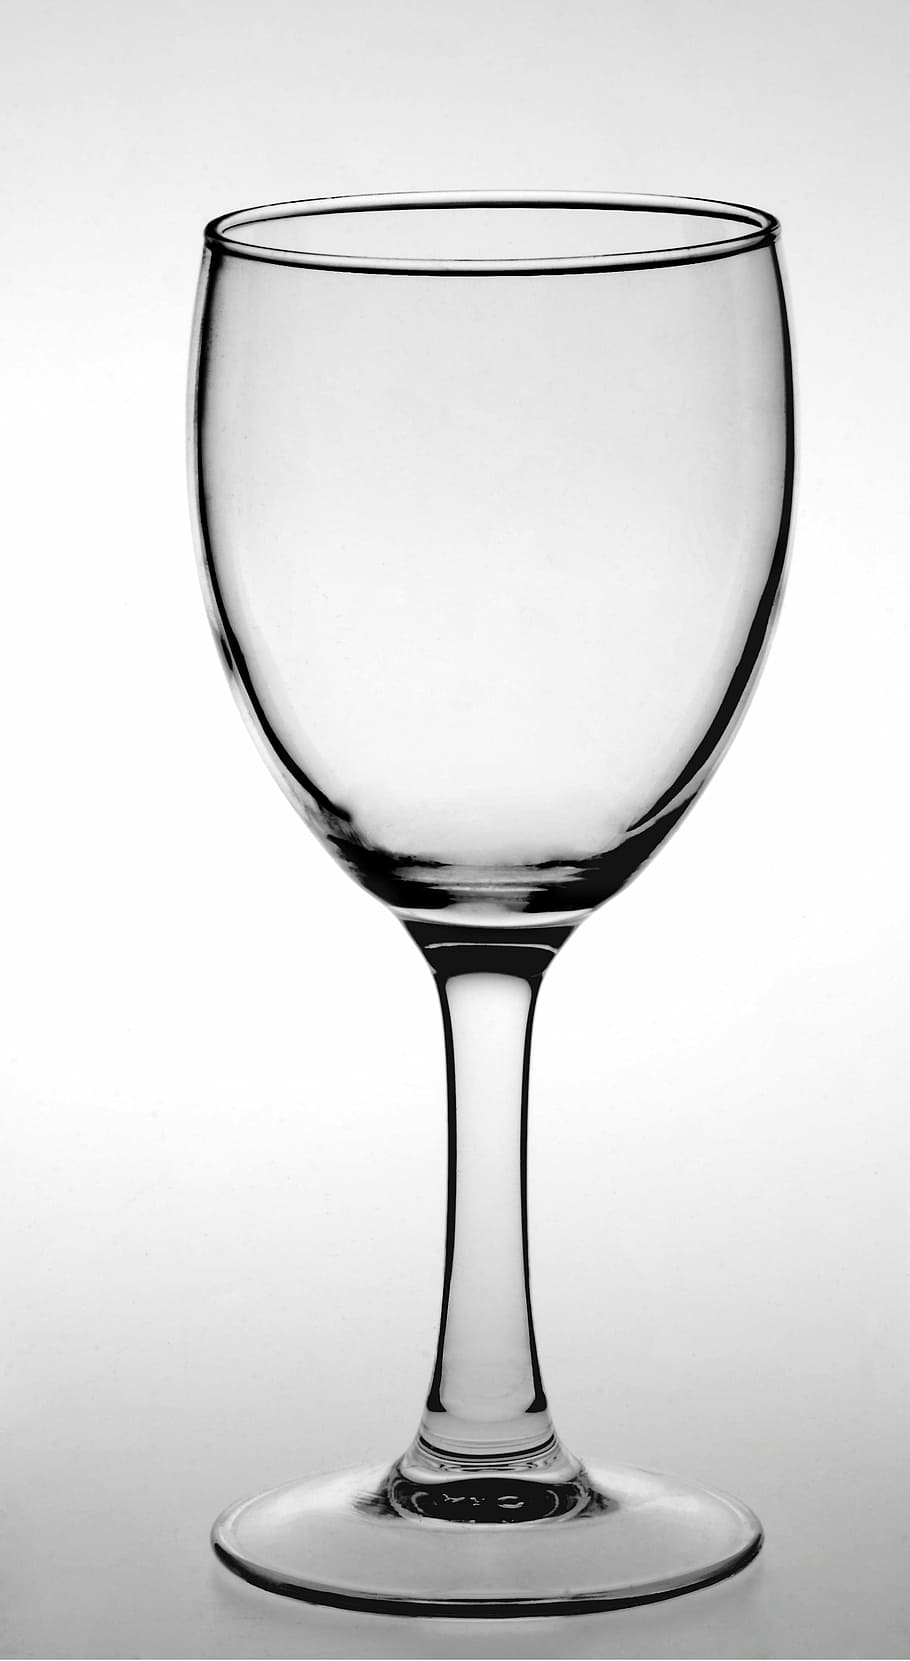 clear wine glass, glass, white background, black lines, goblet, red wine glass, drinking glass, drink, alcohol, studio shot